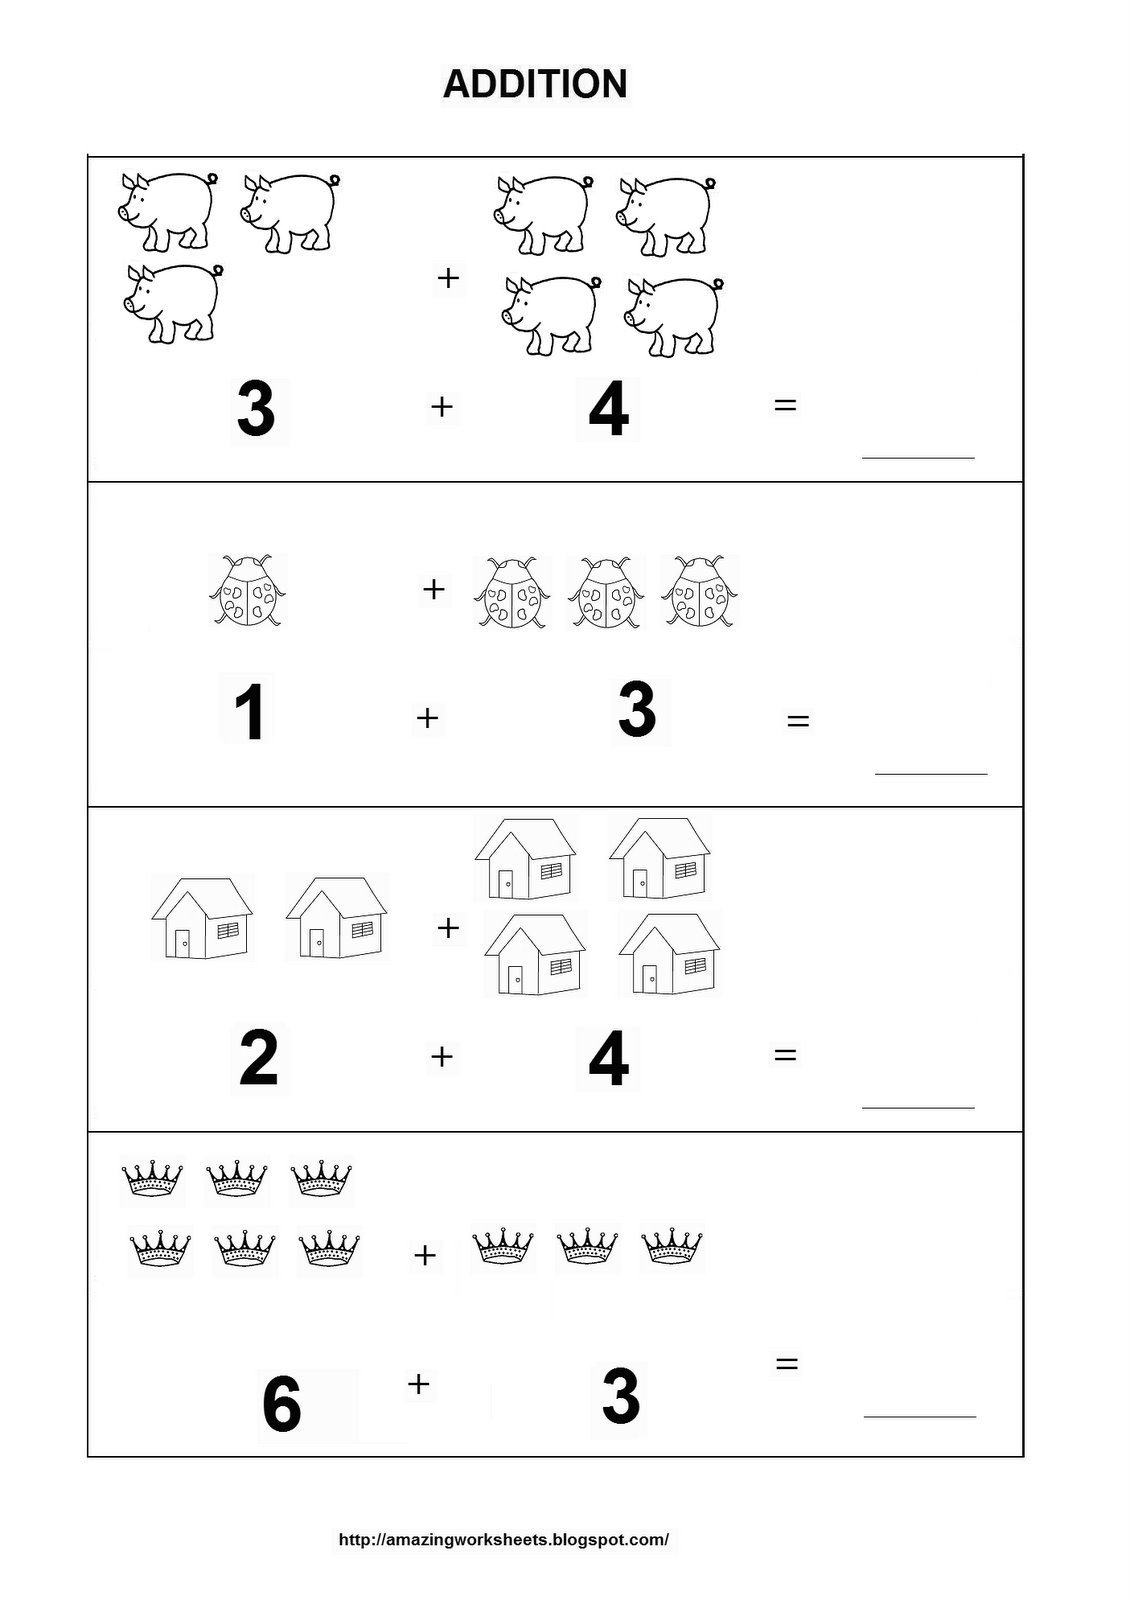 14 Best Images of Adding Objects Worksheets - Adding One Math Addition